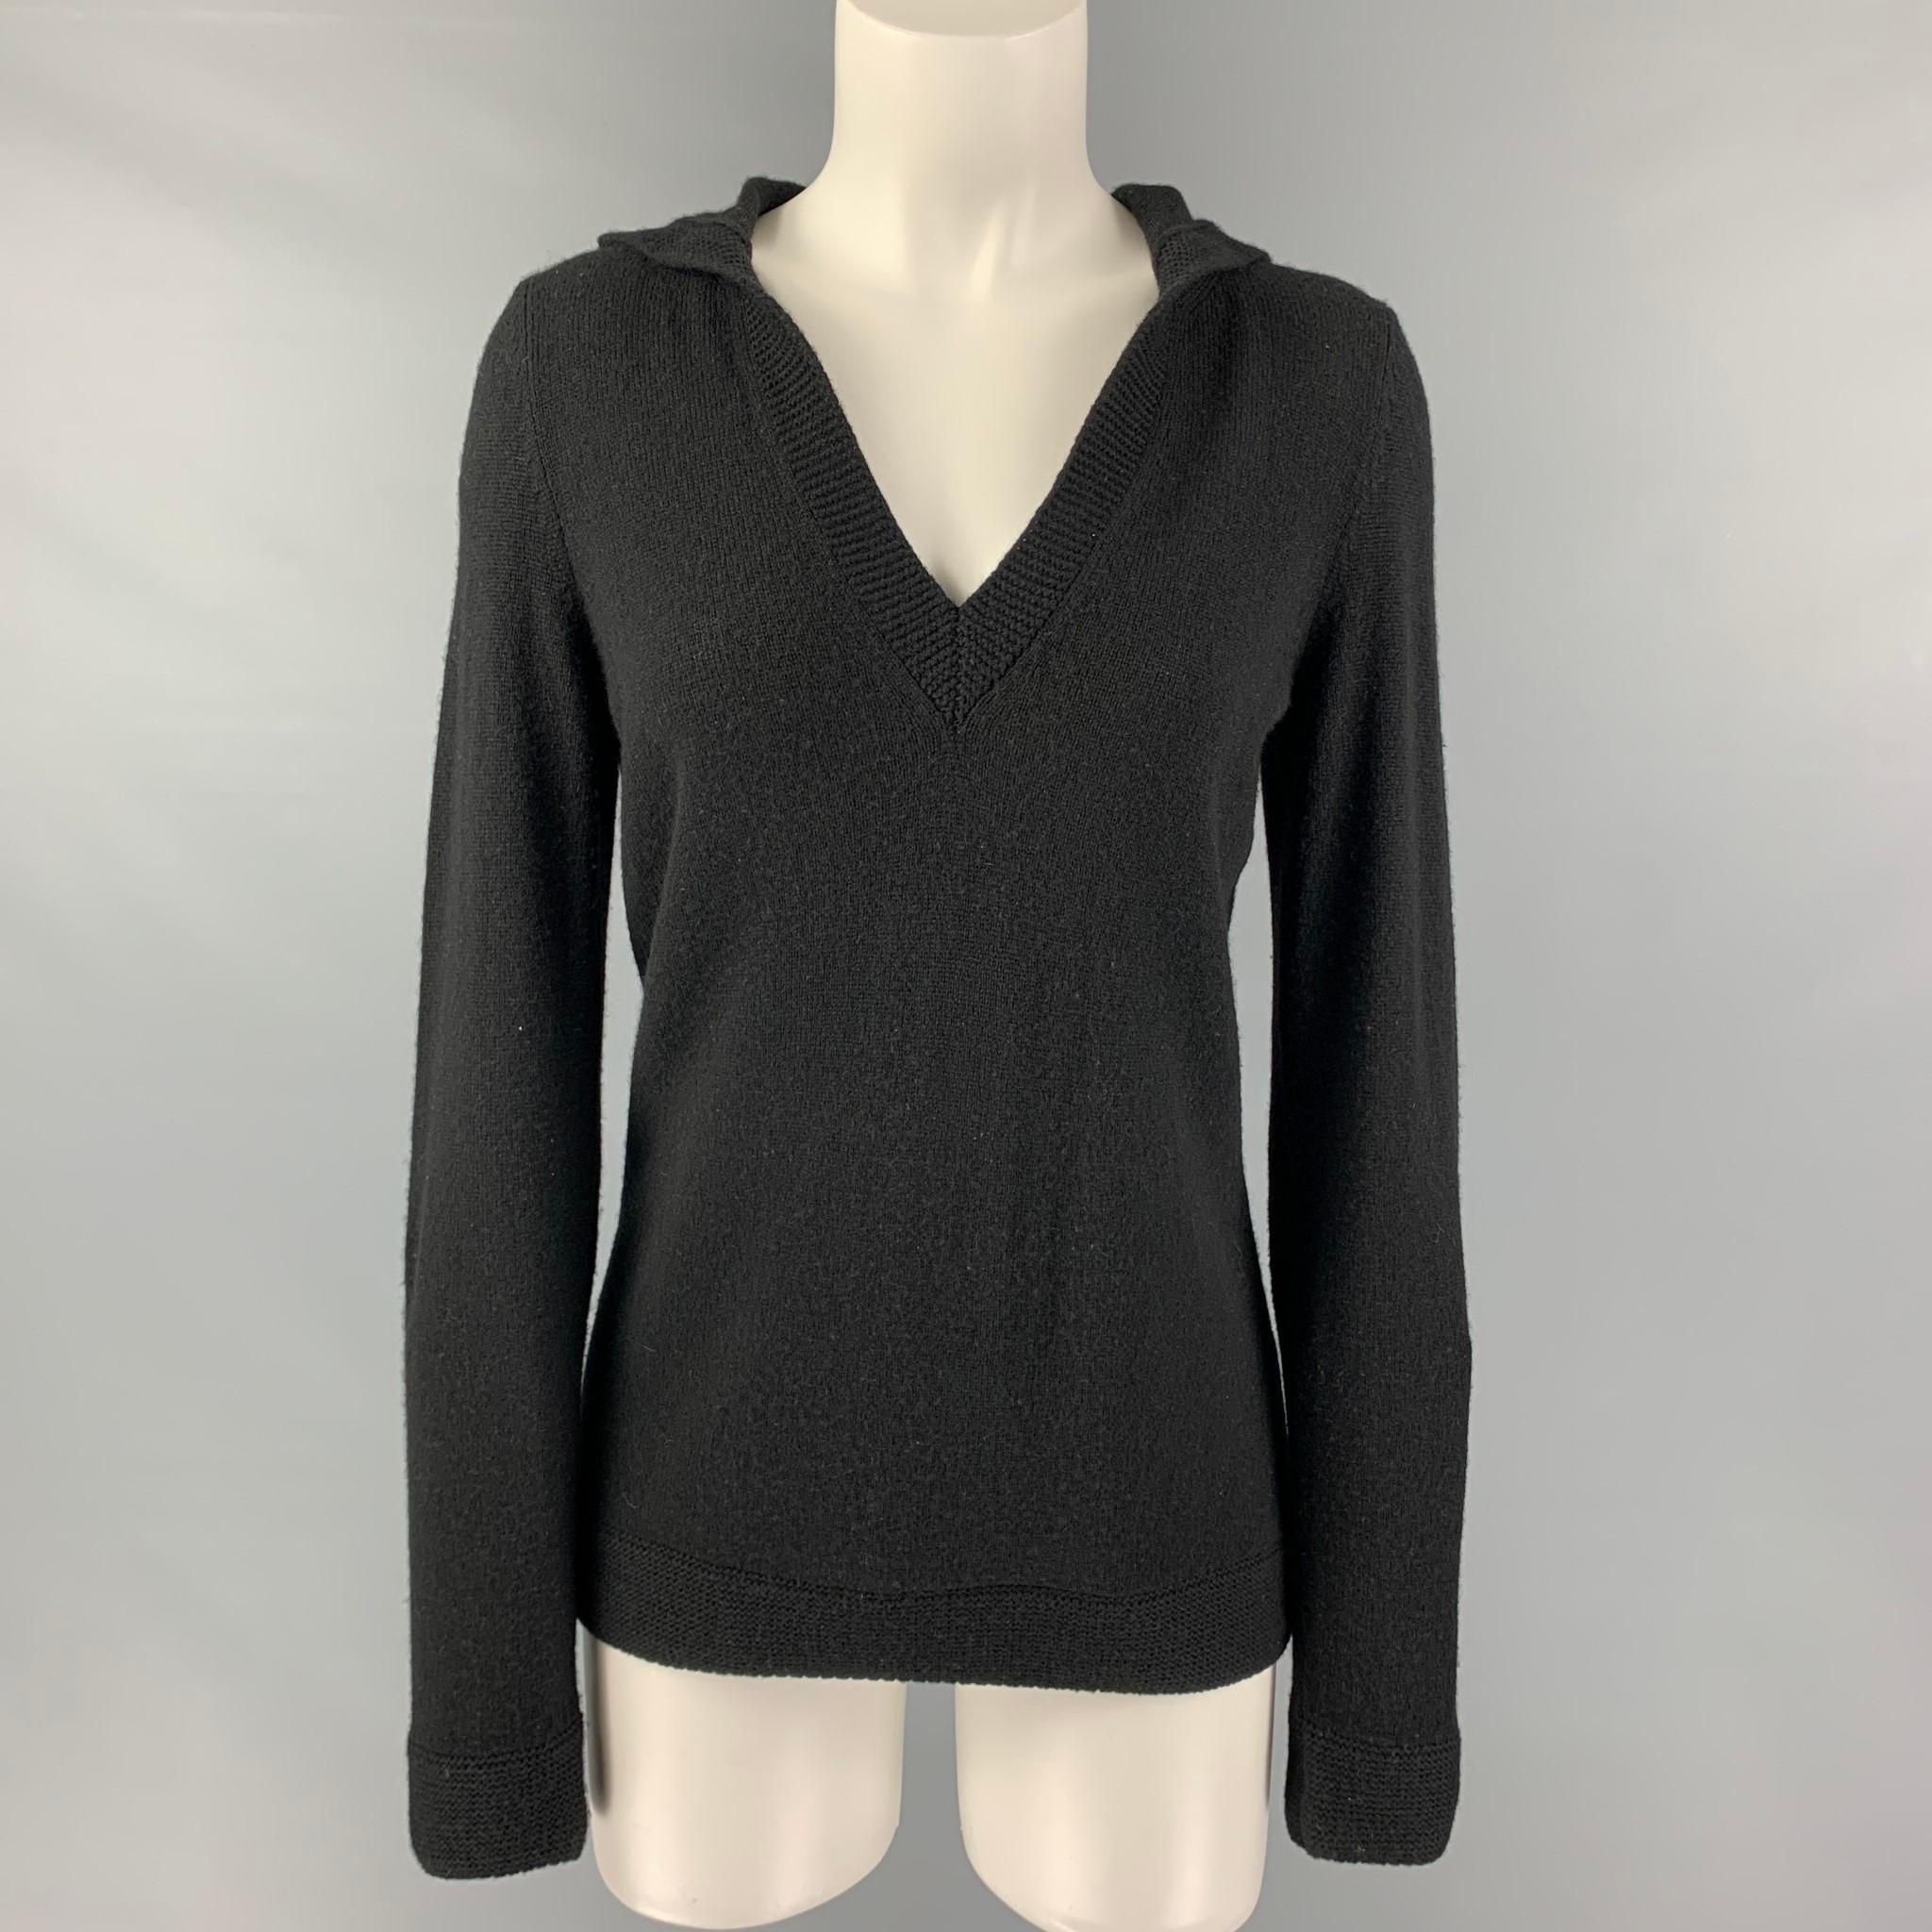 LORO PIANA sweater comes in a black cashmere featuring a hooded style, elbow patch, and a v-neck.

Good Pre-Owned Condition. Moderate Signs of Wear. As is.
Marked: 44

Measurements:

Shoulder: 14 in.
Bust: 42 in.
Sleeve: 27 in.
Length: 26.5